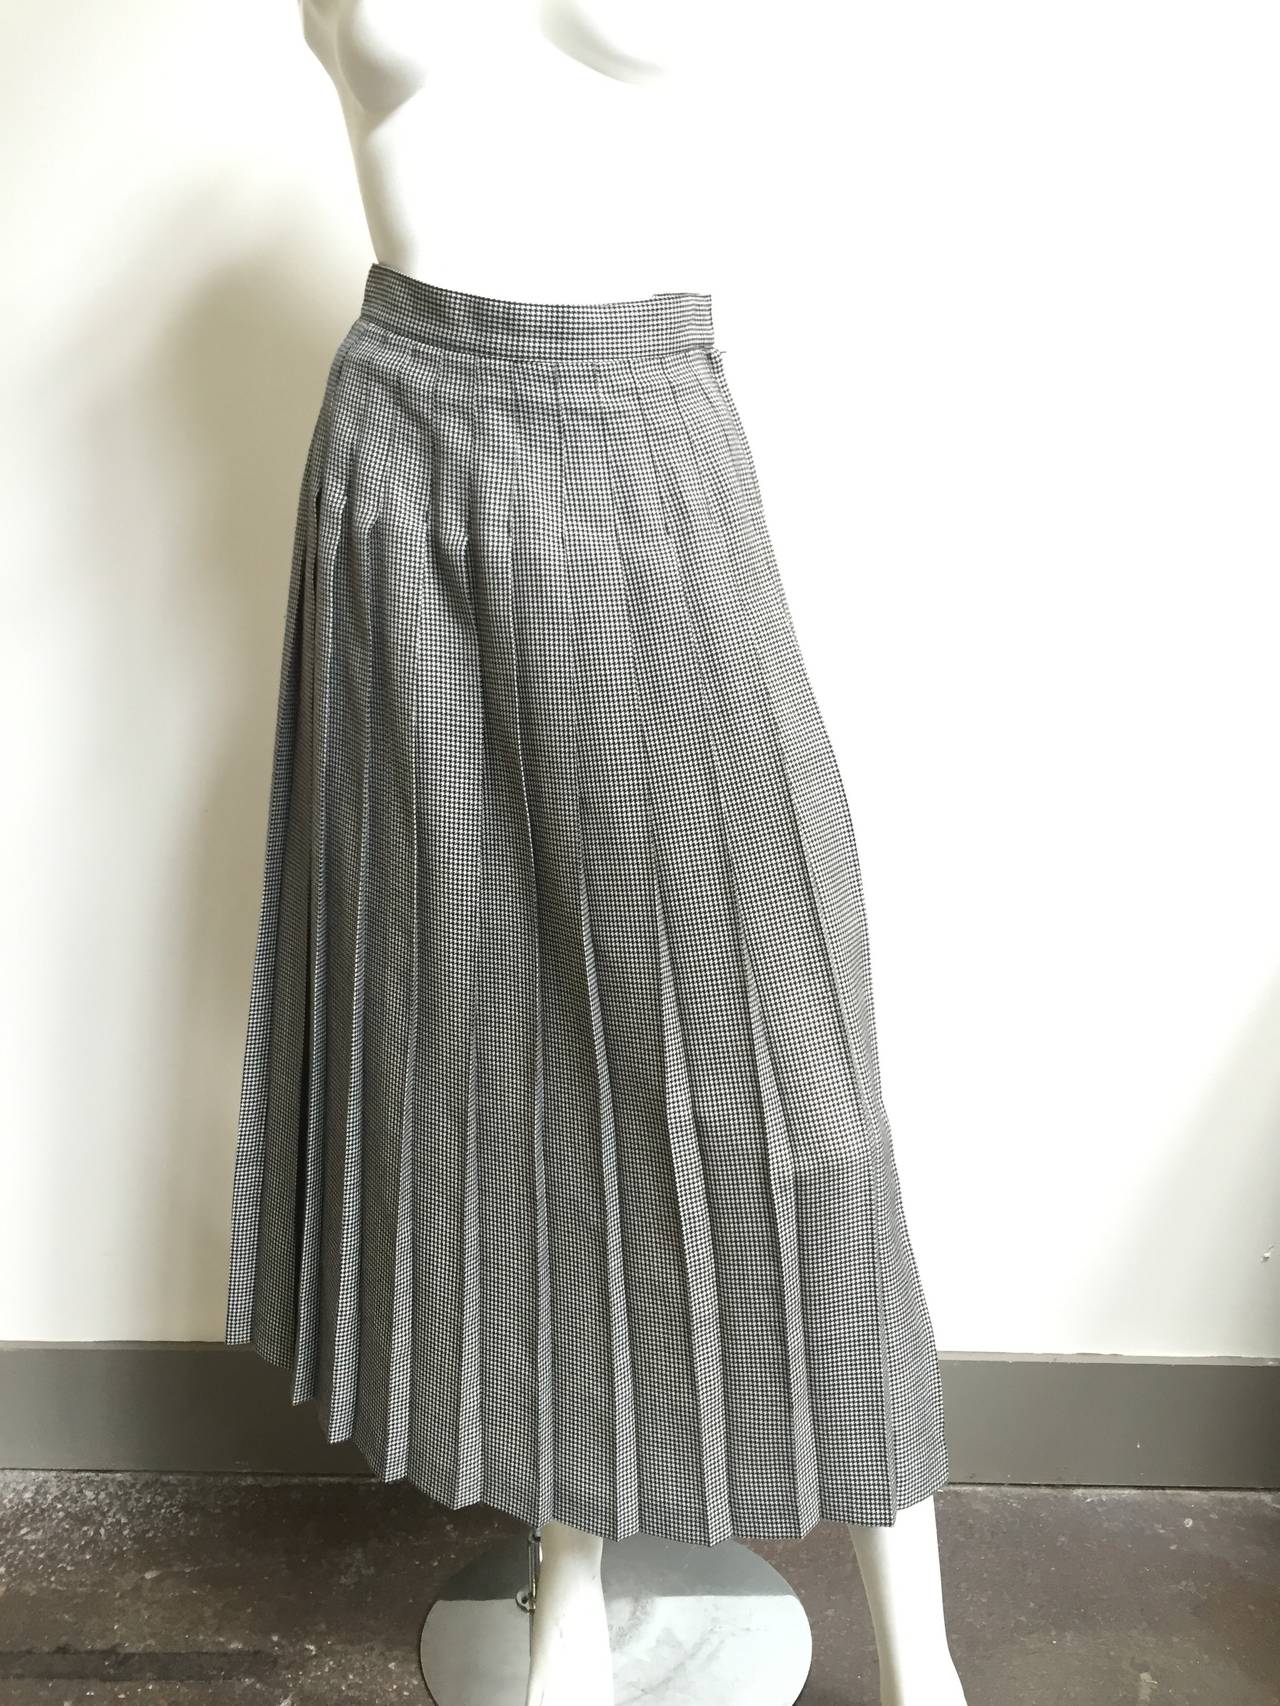 Women's Dior 1980s Wool Long Houndstooth Pleated Skirt Size 4.